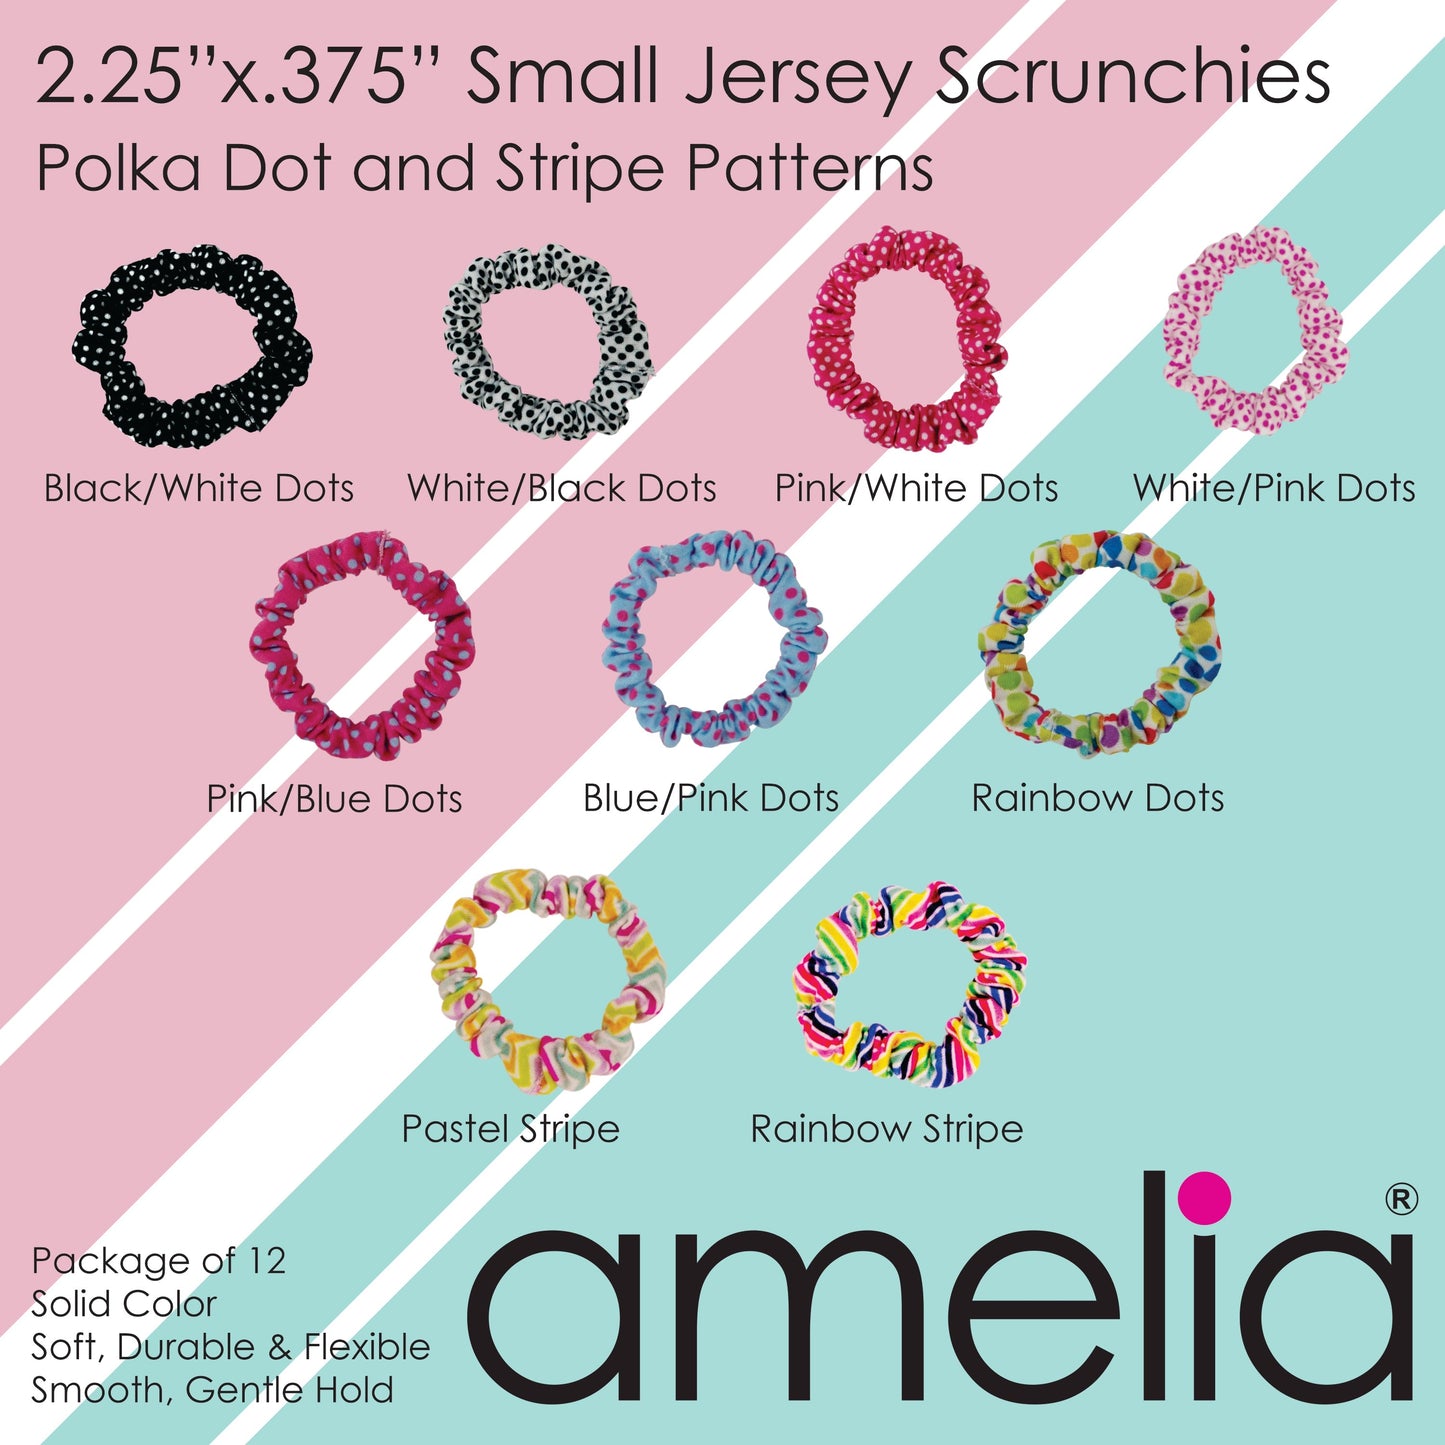 Amelia Beauty, Sky Jersey Scrunchies, 2.25in Diameter, Gentle on Hair, Strong Hold, No Snag, No Dents or Creases. 12 Pack - 12 Retail Packs